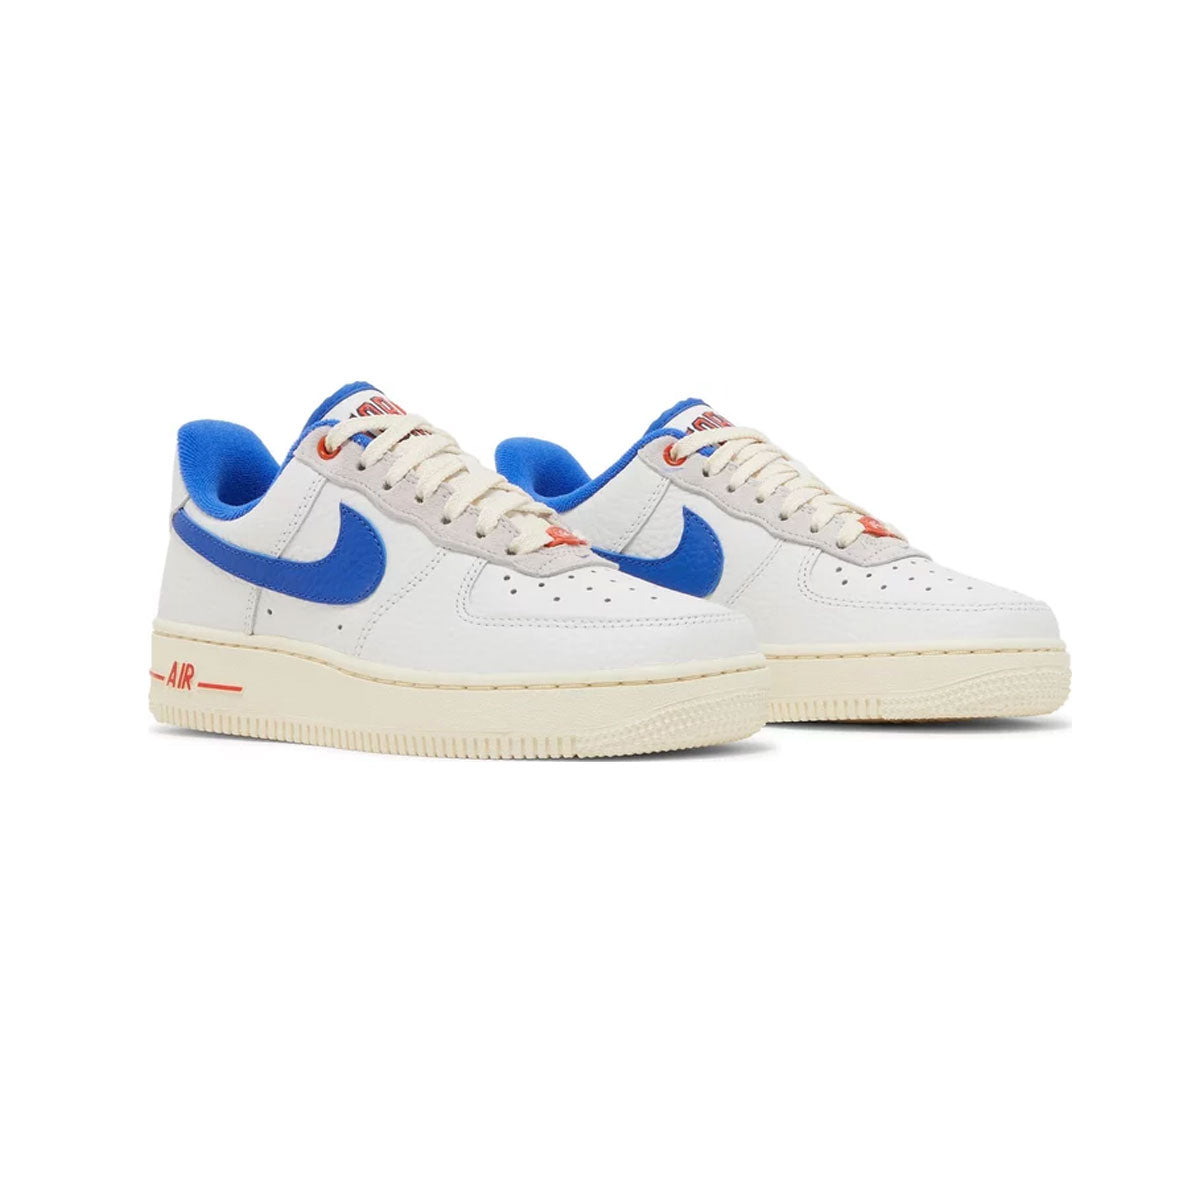 Nike Women's Air Force 1 Low '07 LX Command Force